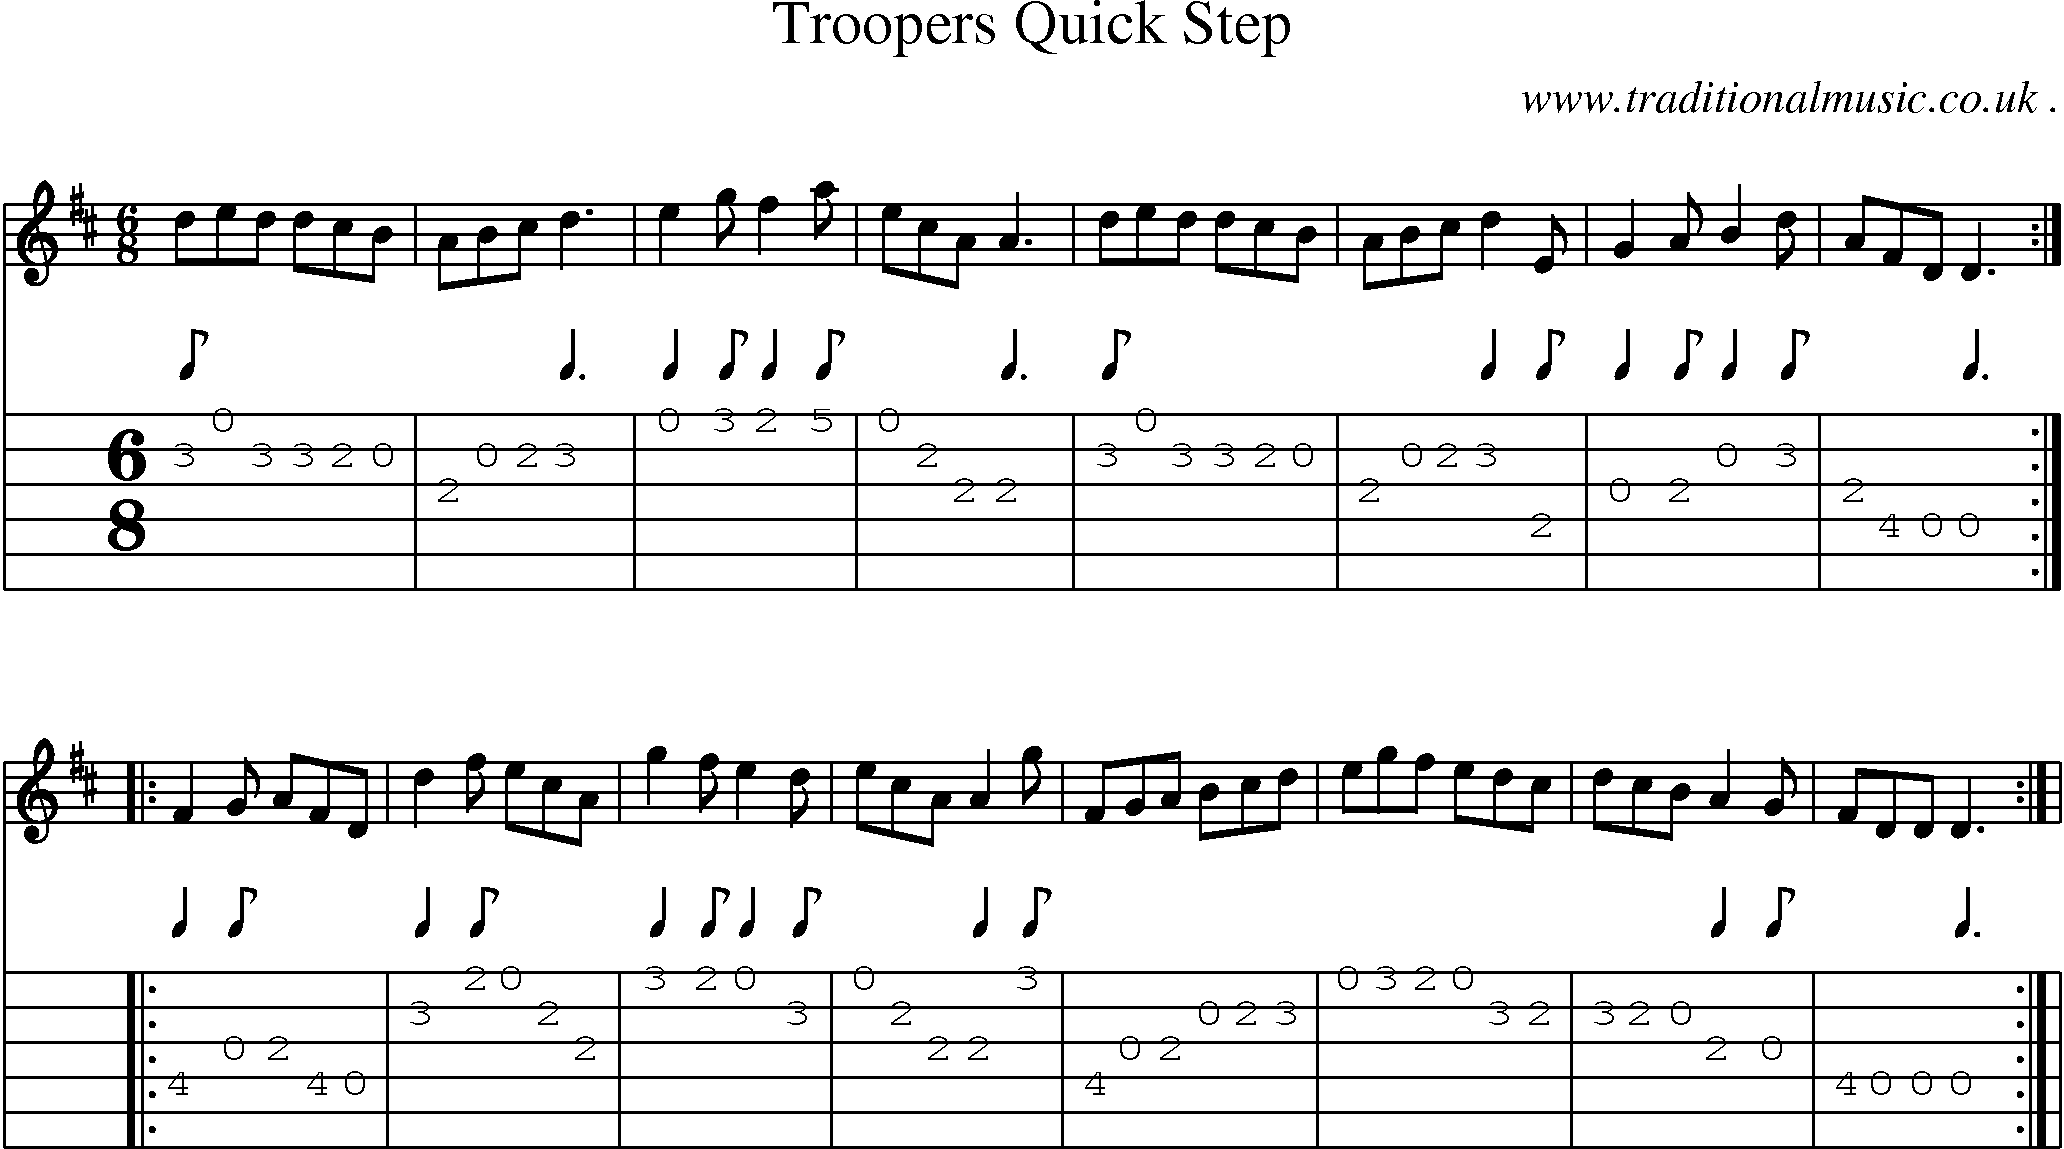 Sheet-Music and Guitar Tabs for Troopers Quick Step